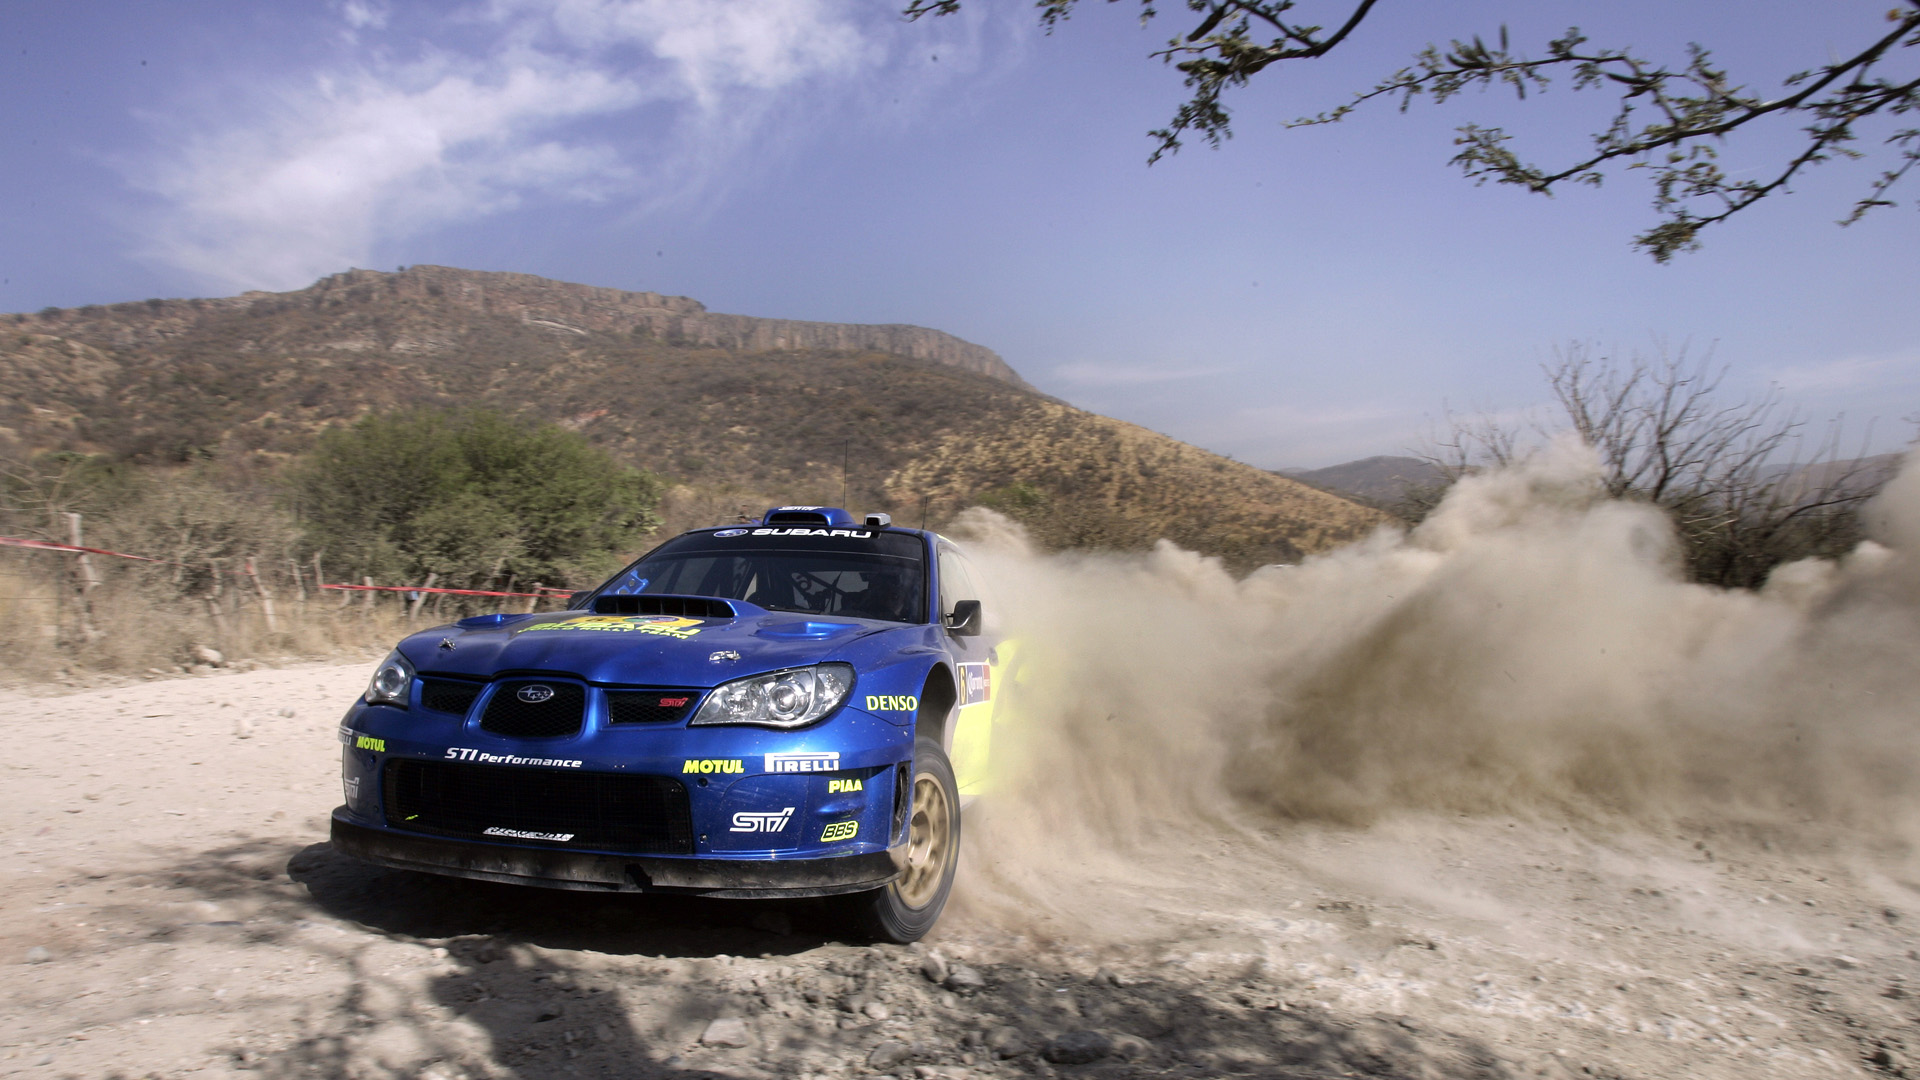 Free Download 19 X 1080 Wallpapers Full Hd Wallpapers 1080p Subaru Rally 19x1080 For Your Desktop Mobile Tablet Explore 36 Subaru Wallpaper 1080p Subaru Wallpaper Subaru Logo Wallpaper Subaru Rally Wallpaper